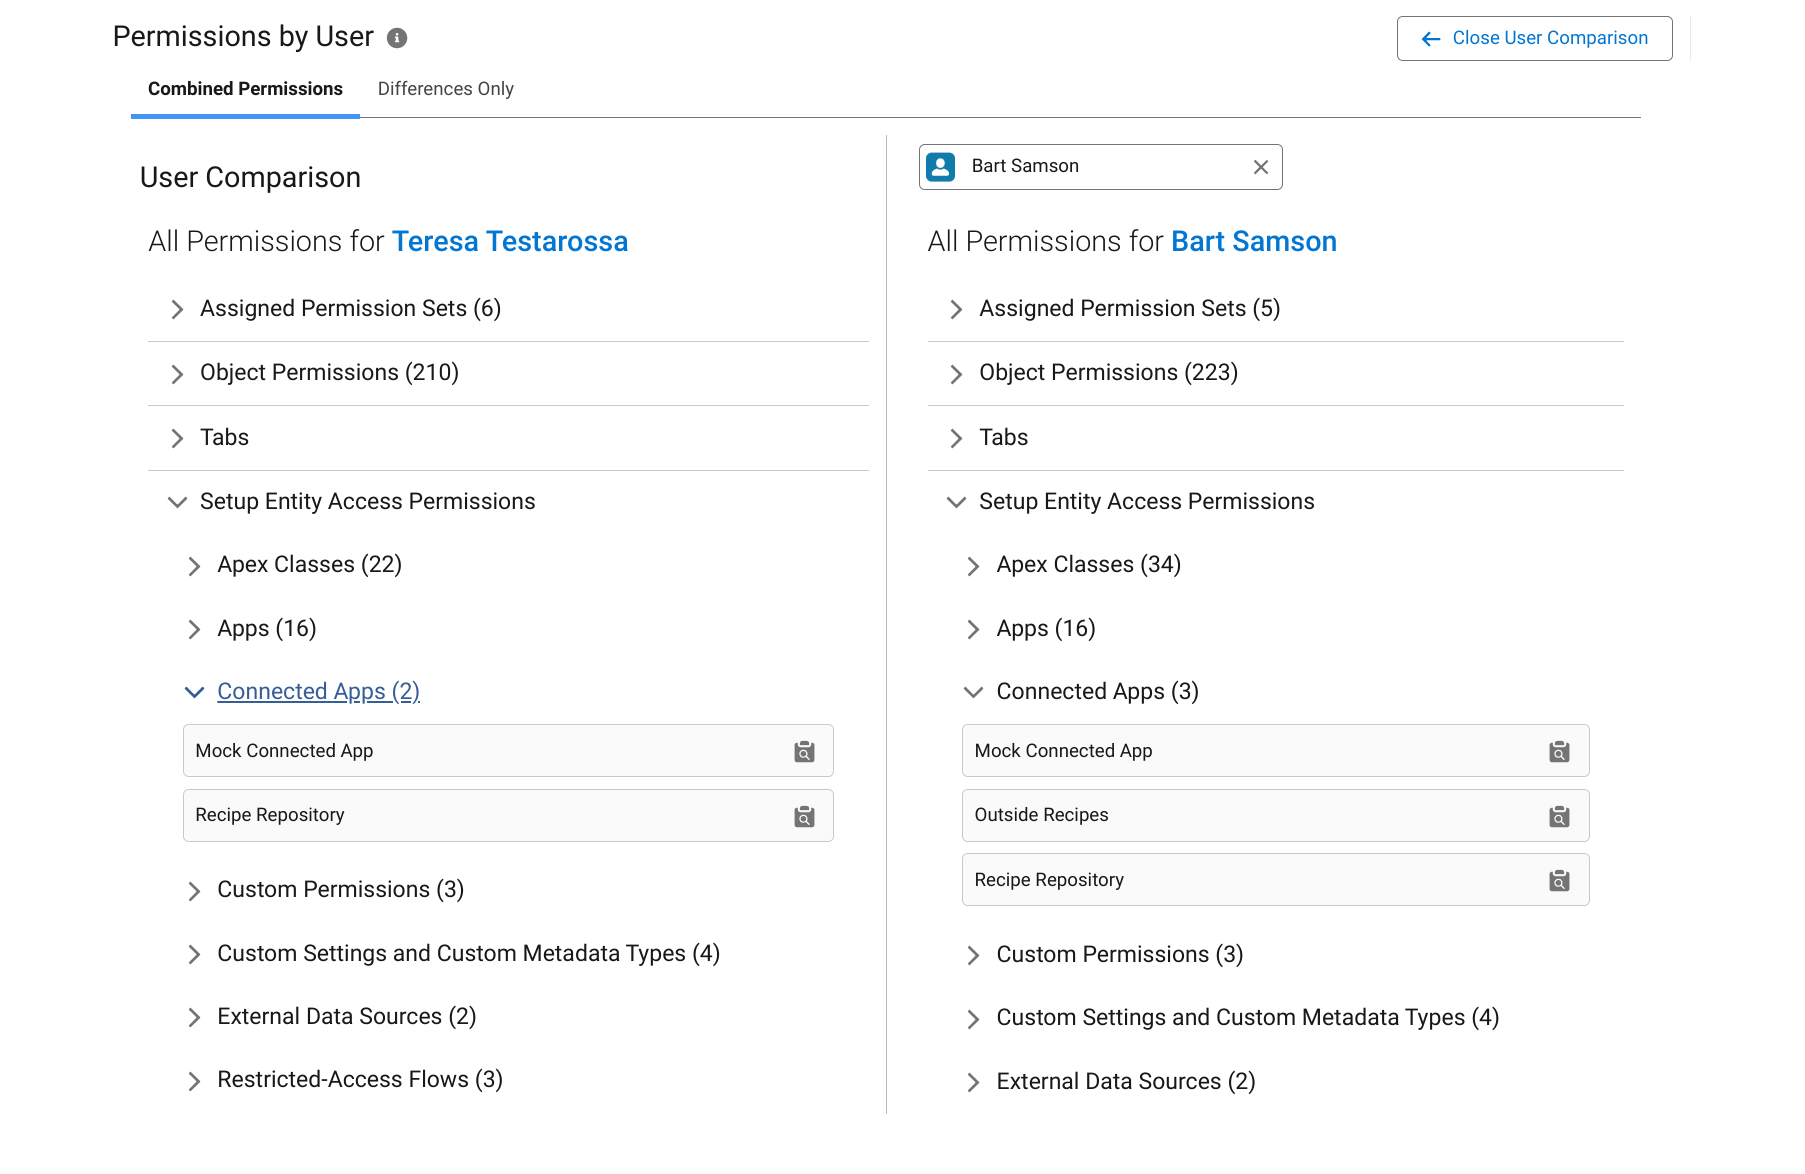 Comparing user permissions side-by-side